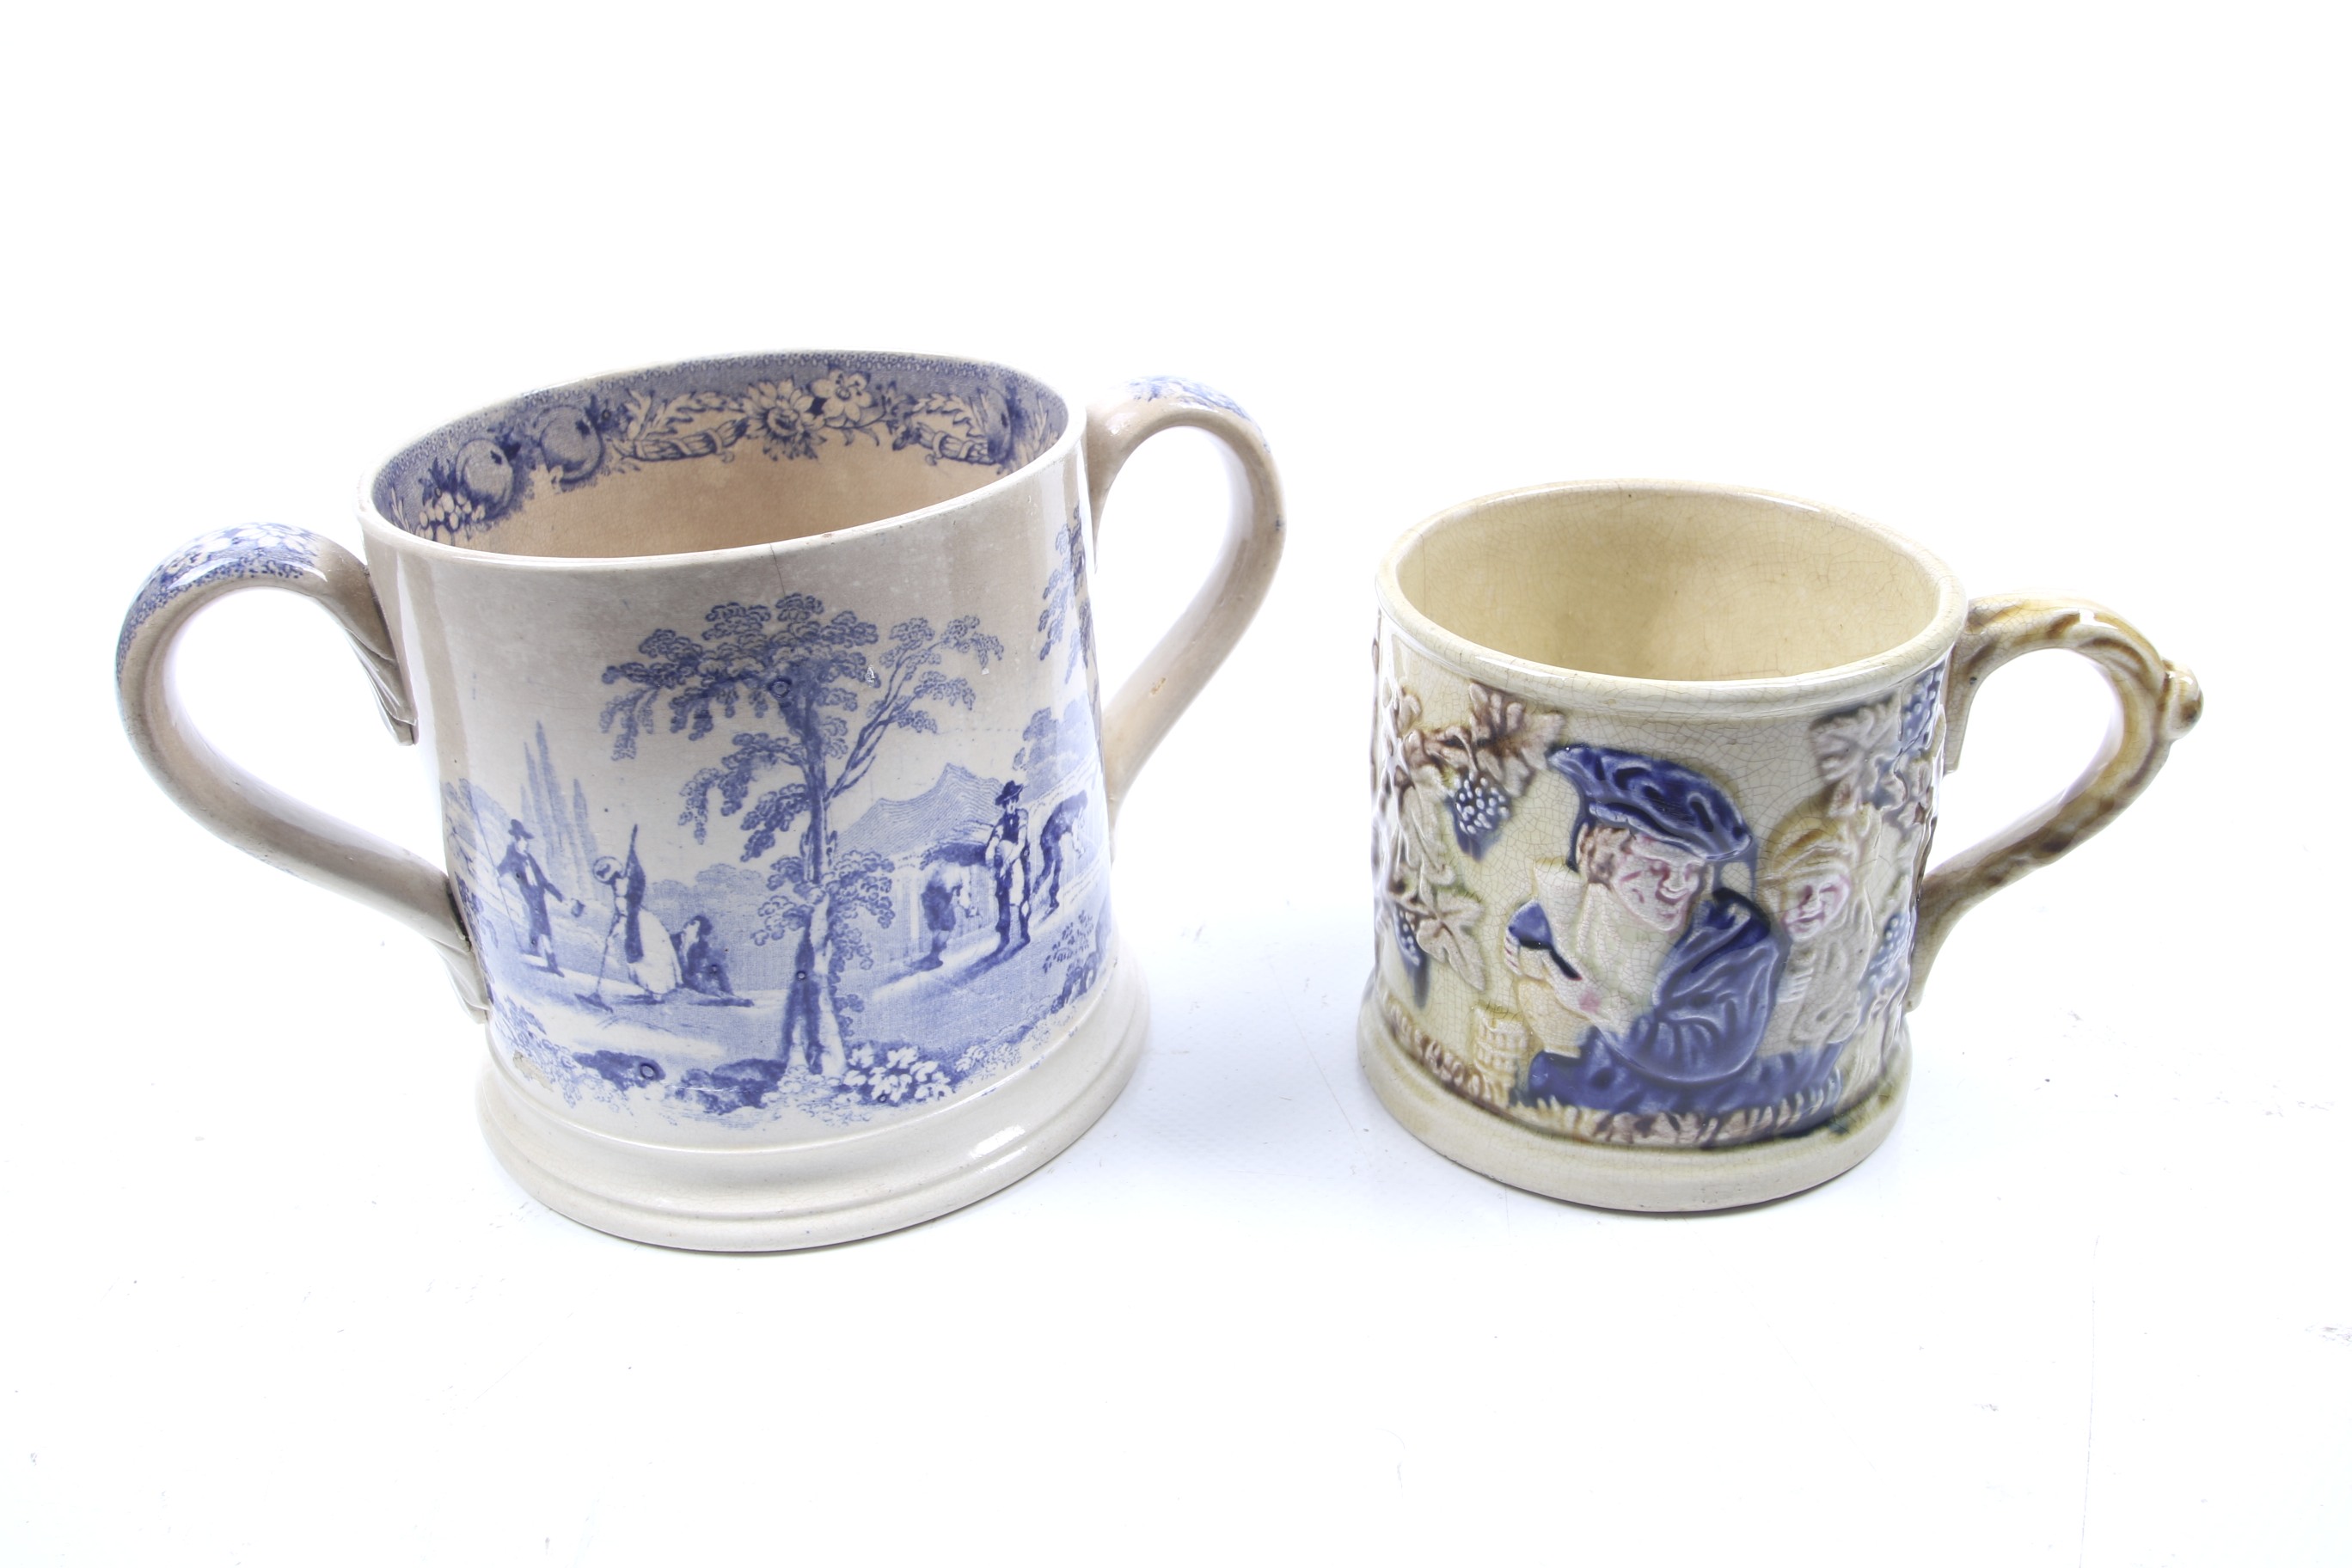 A 19th century Staffordshire pottery loving cup and a frog mug.